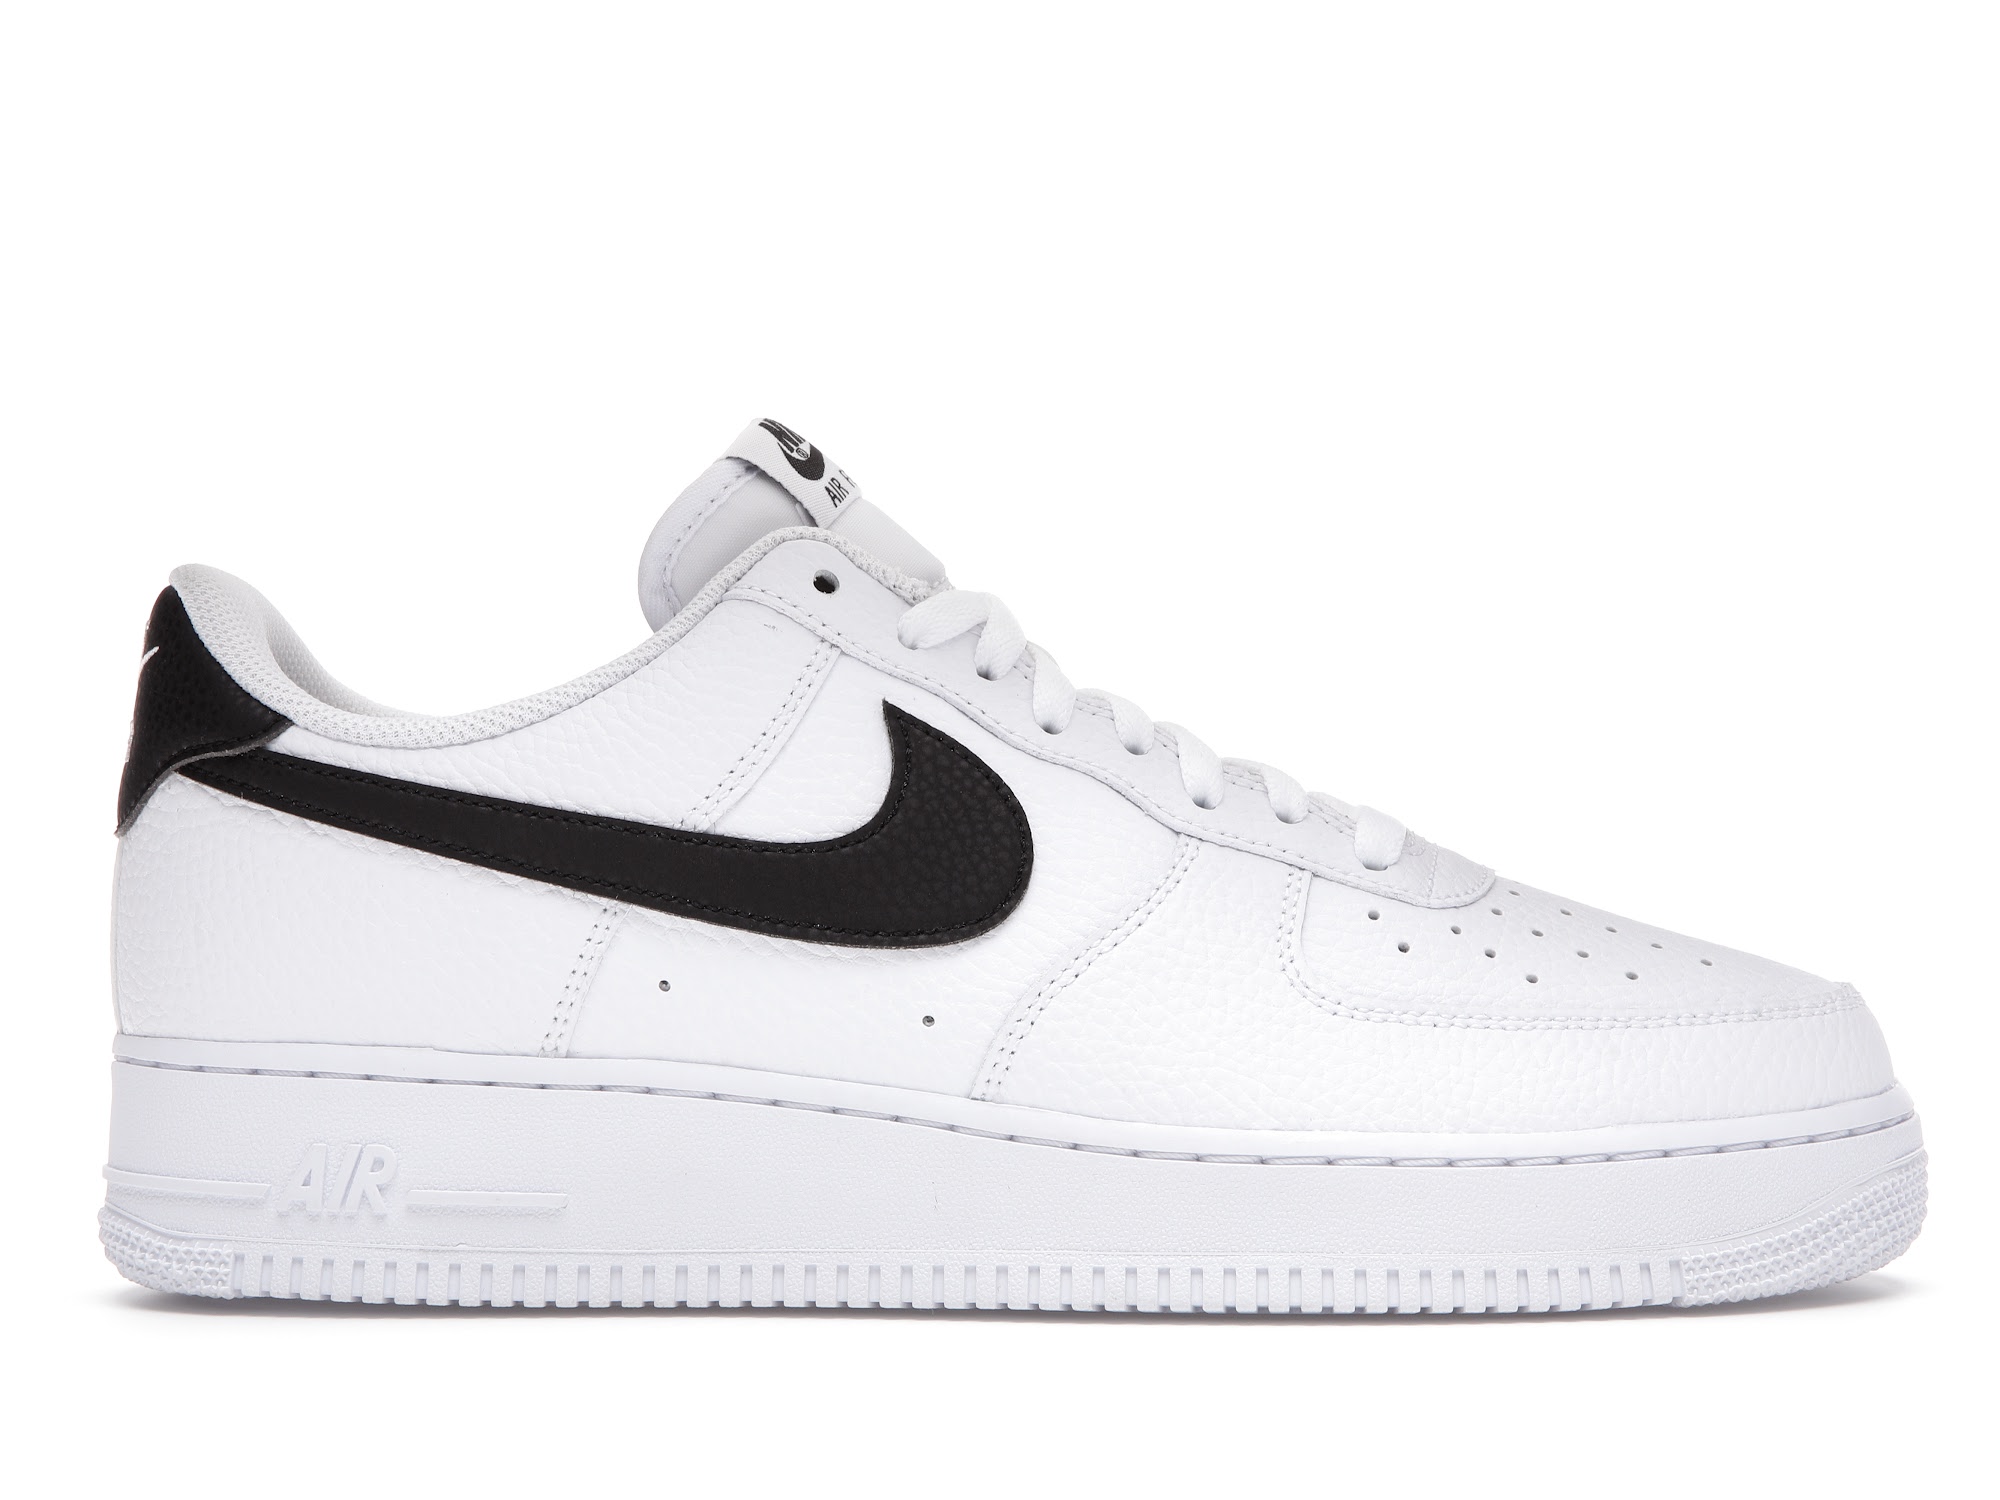 Nike Air Force 1 Low '07 White Black Pebbled Leather Men's ...